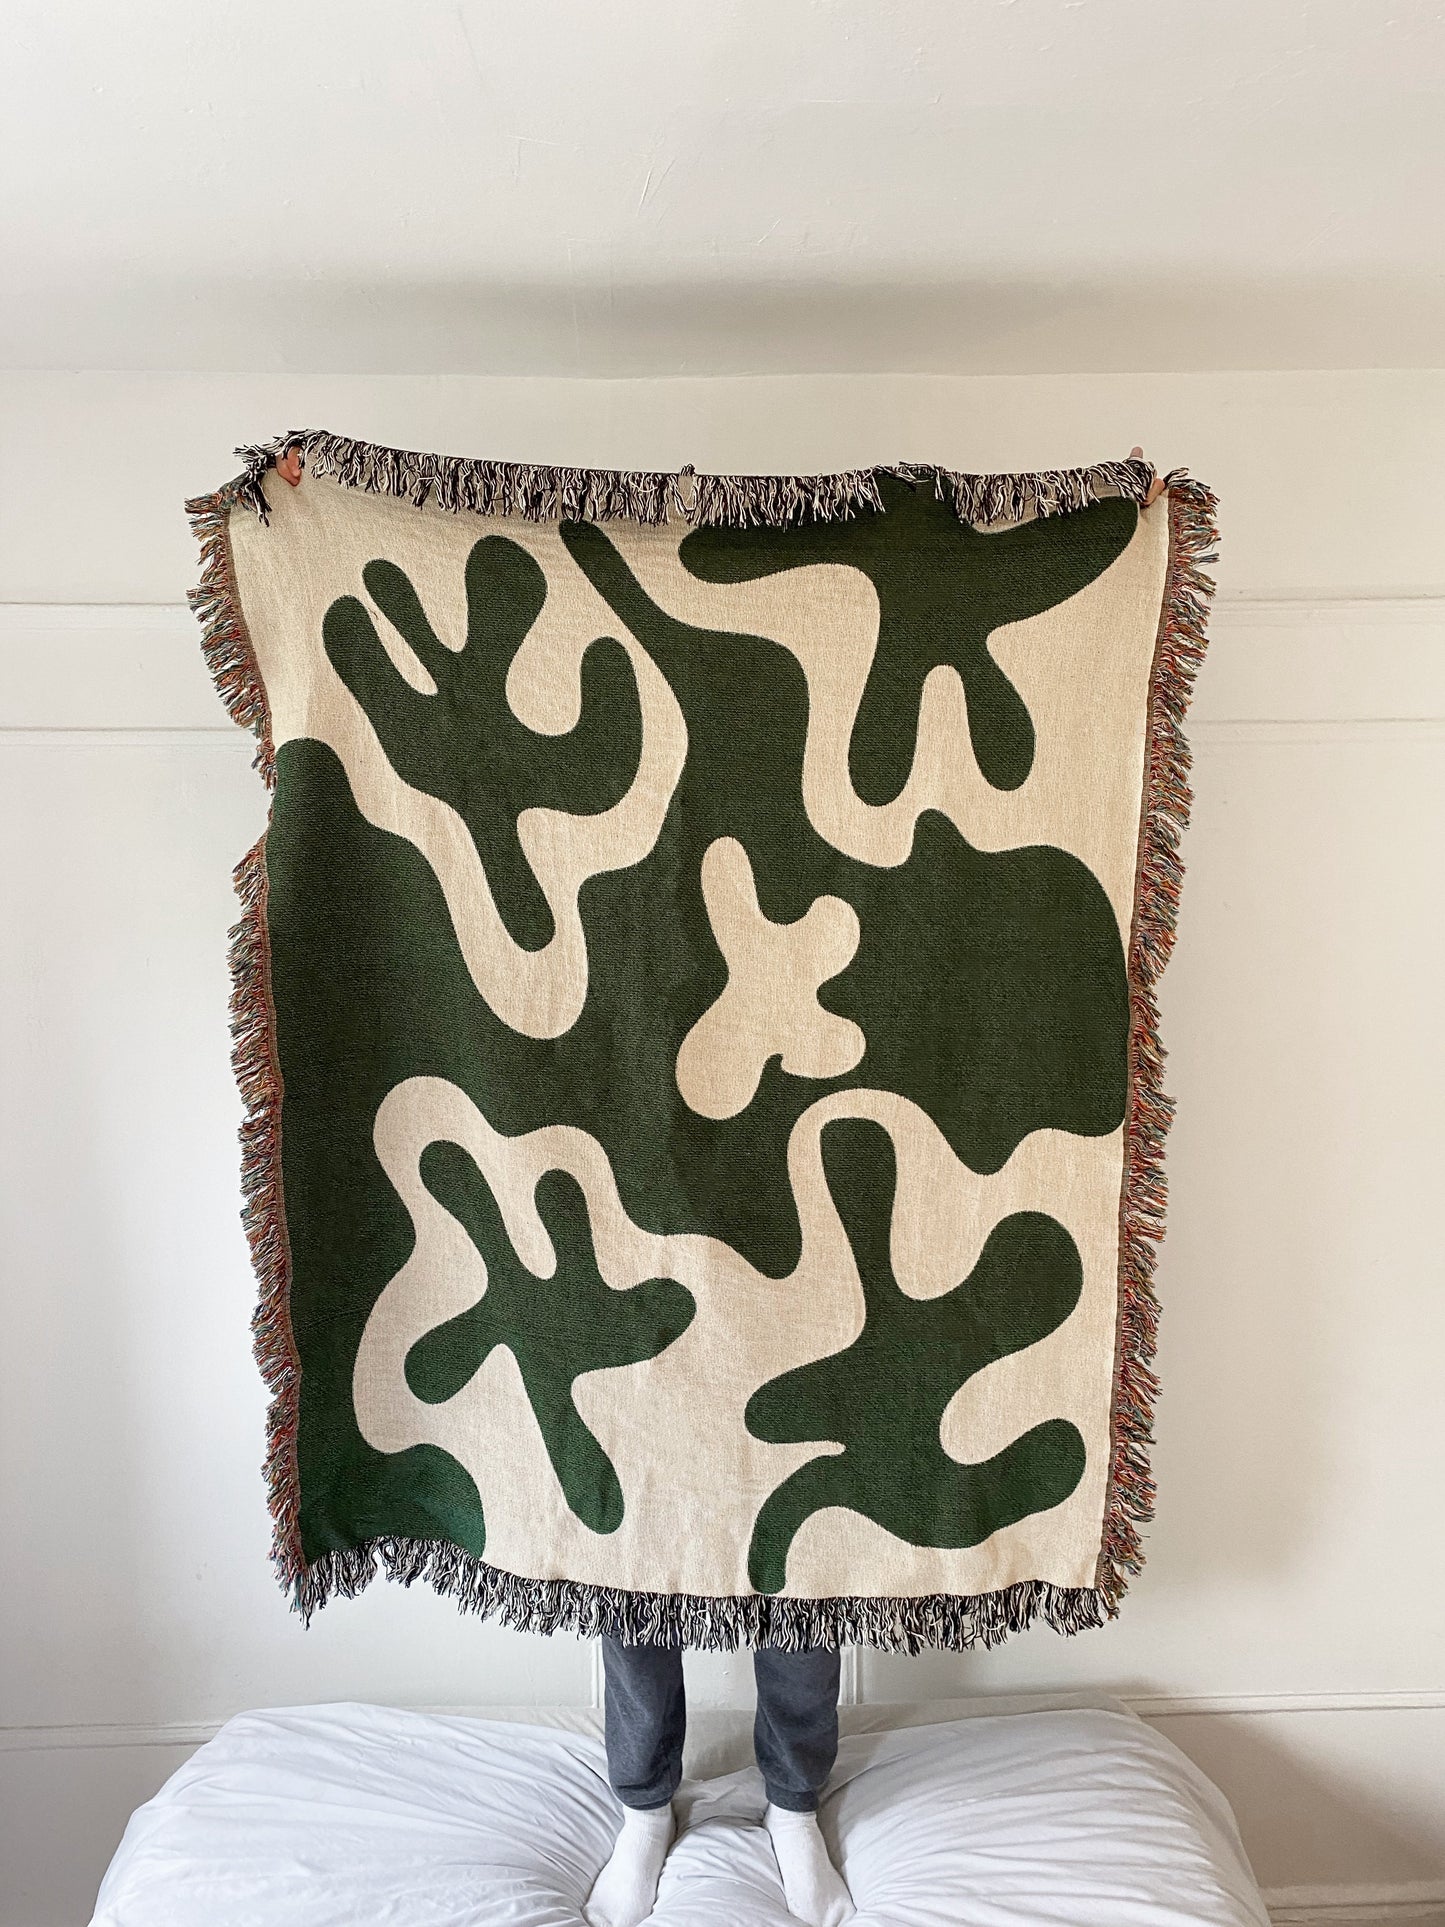 Dancing Shapes - Forest Green Woven Throw Blanket